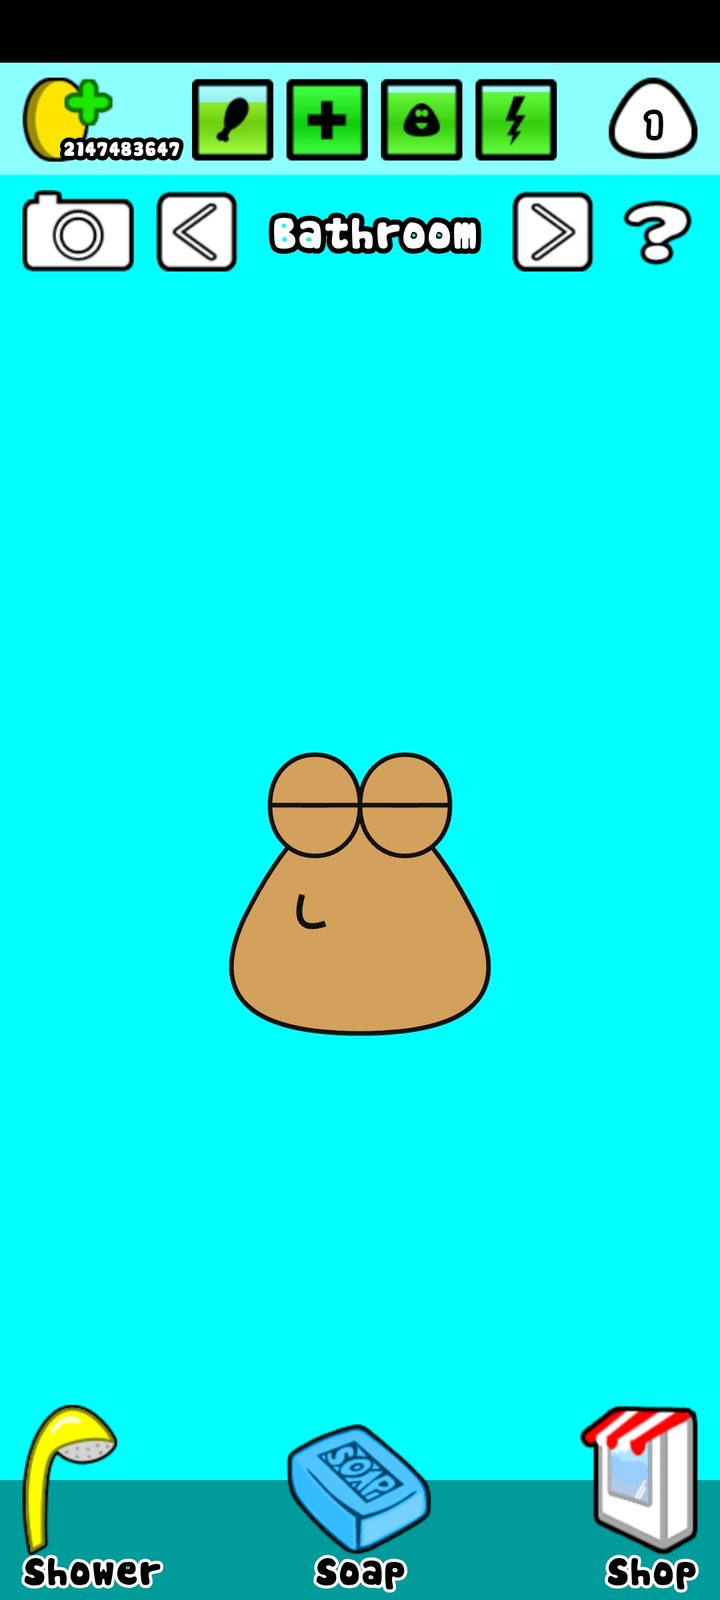 Pou Mod APK 1.4.115 (Unlimited money) Download free for Android